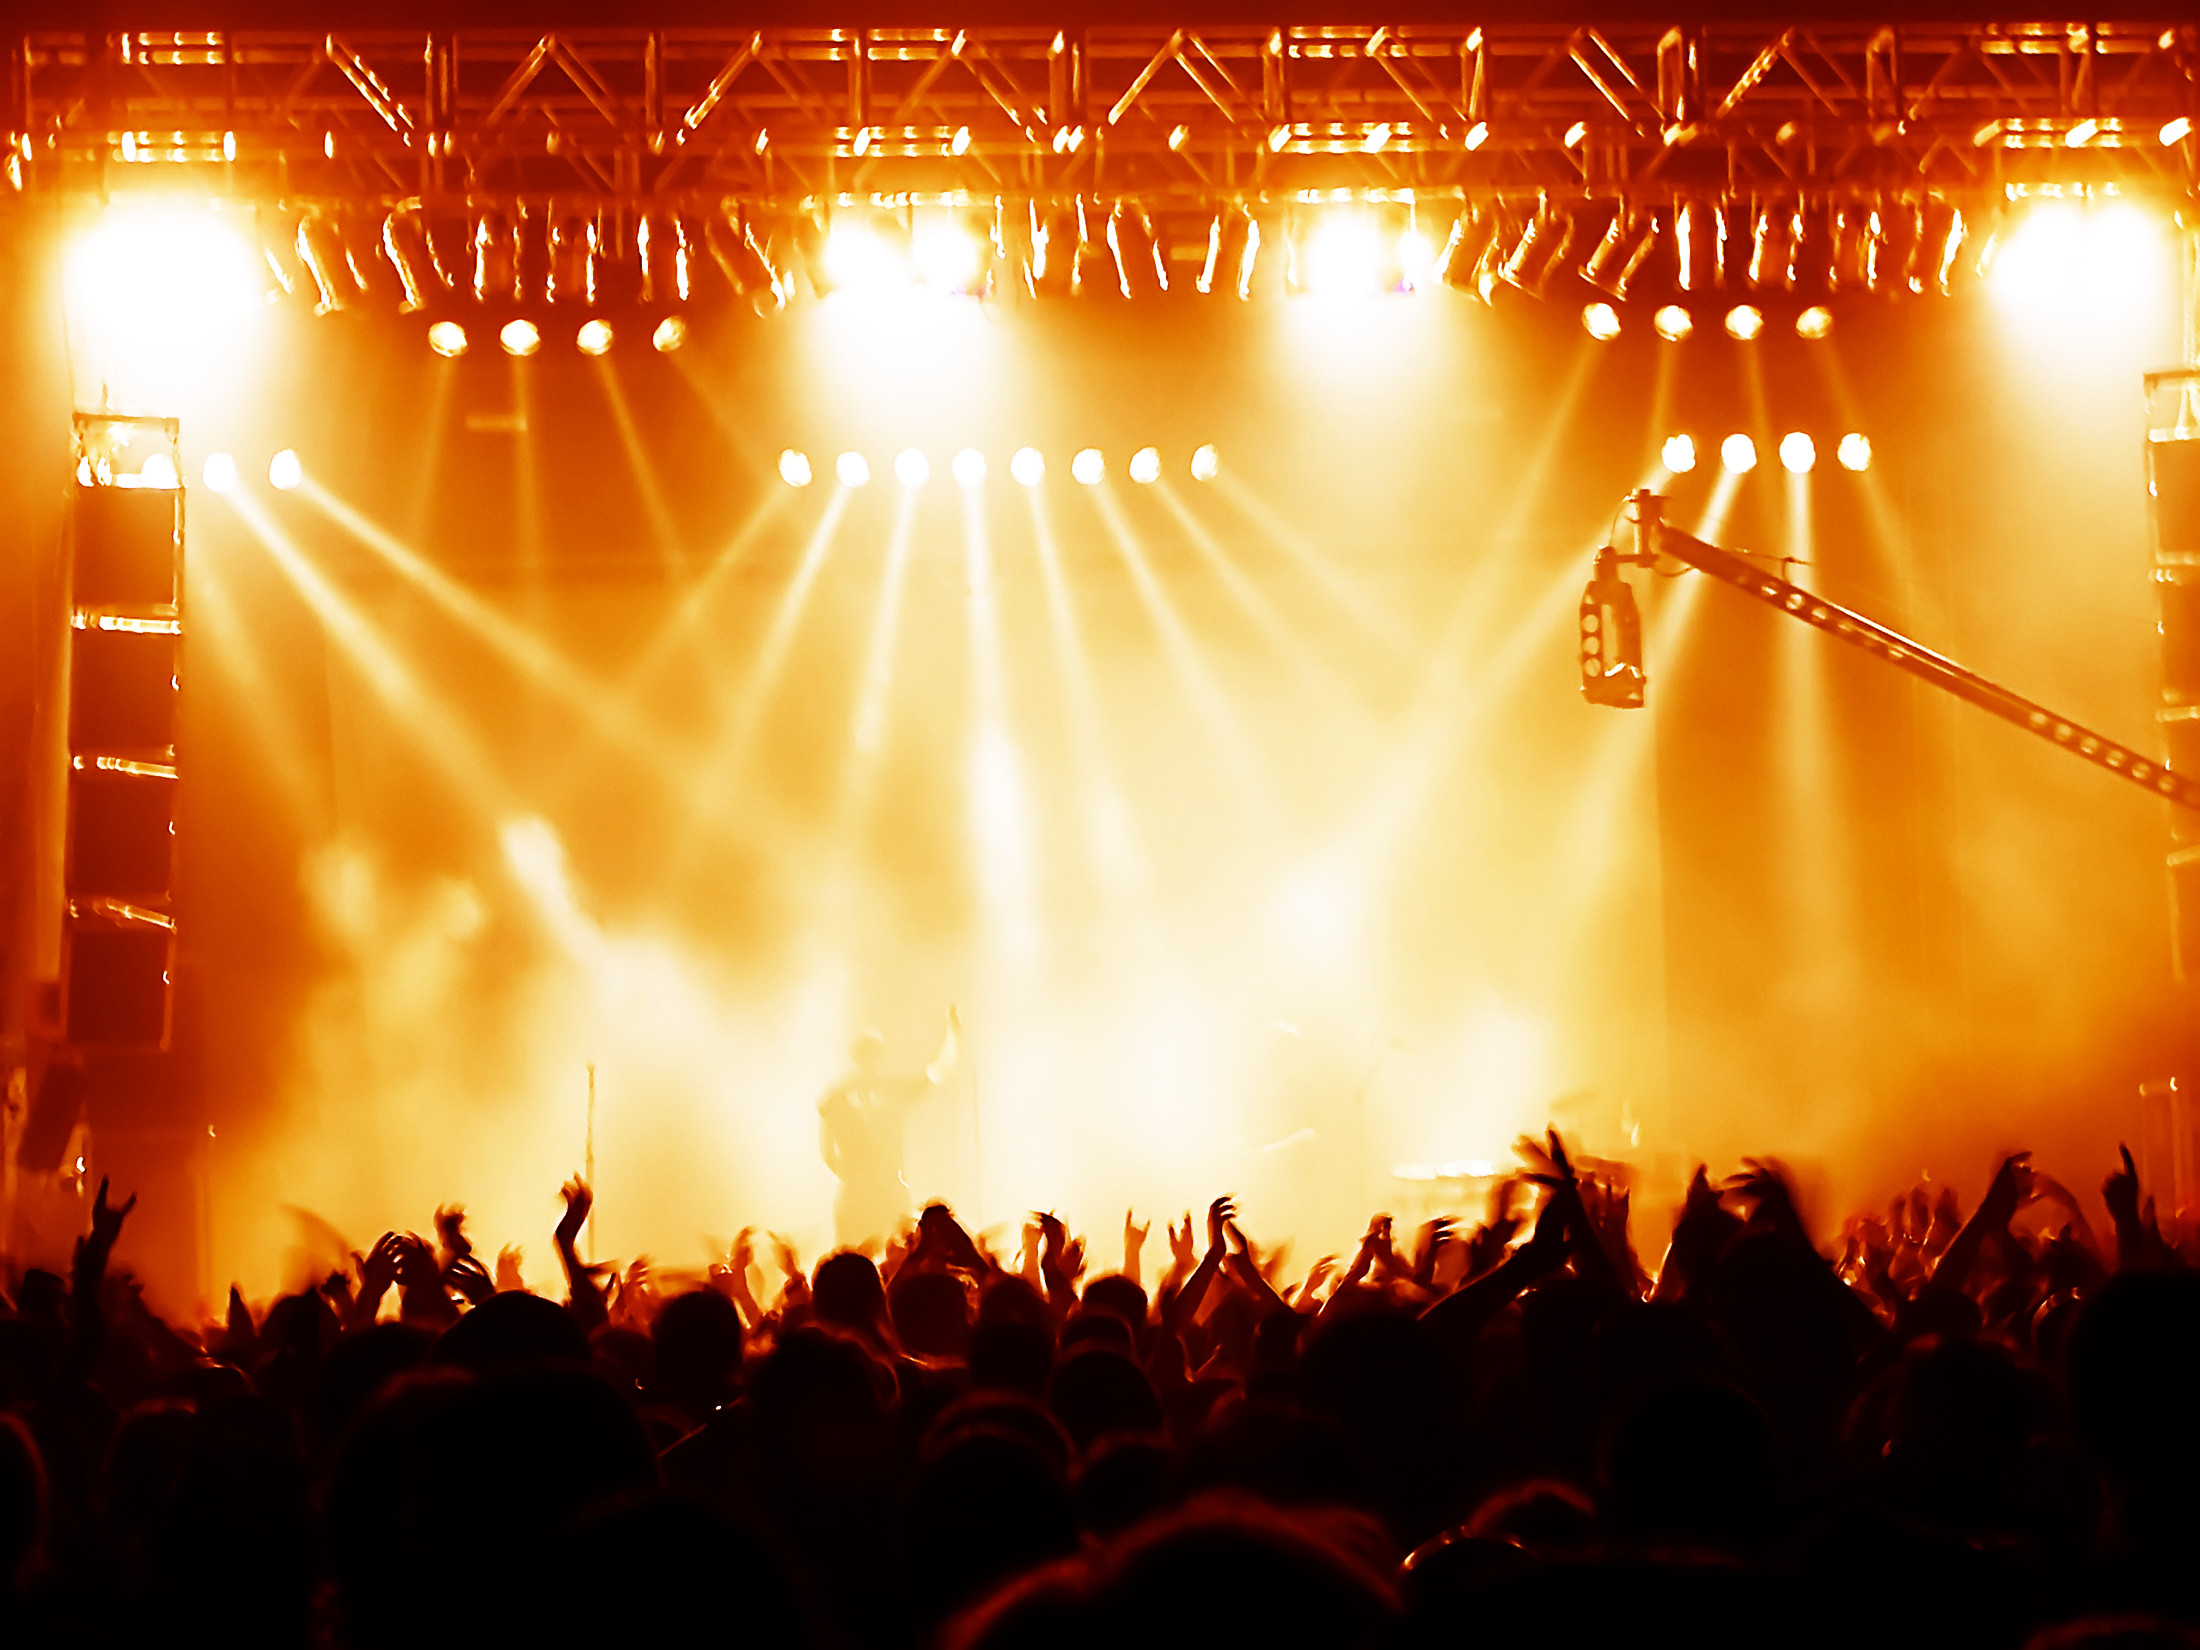 2200x1650 Img backgrounds, Rock concert, wallpapers category